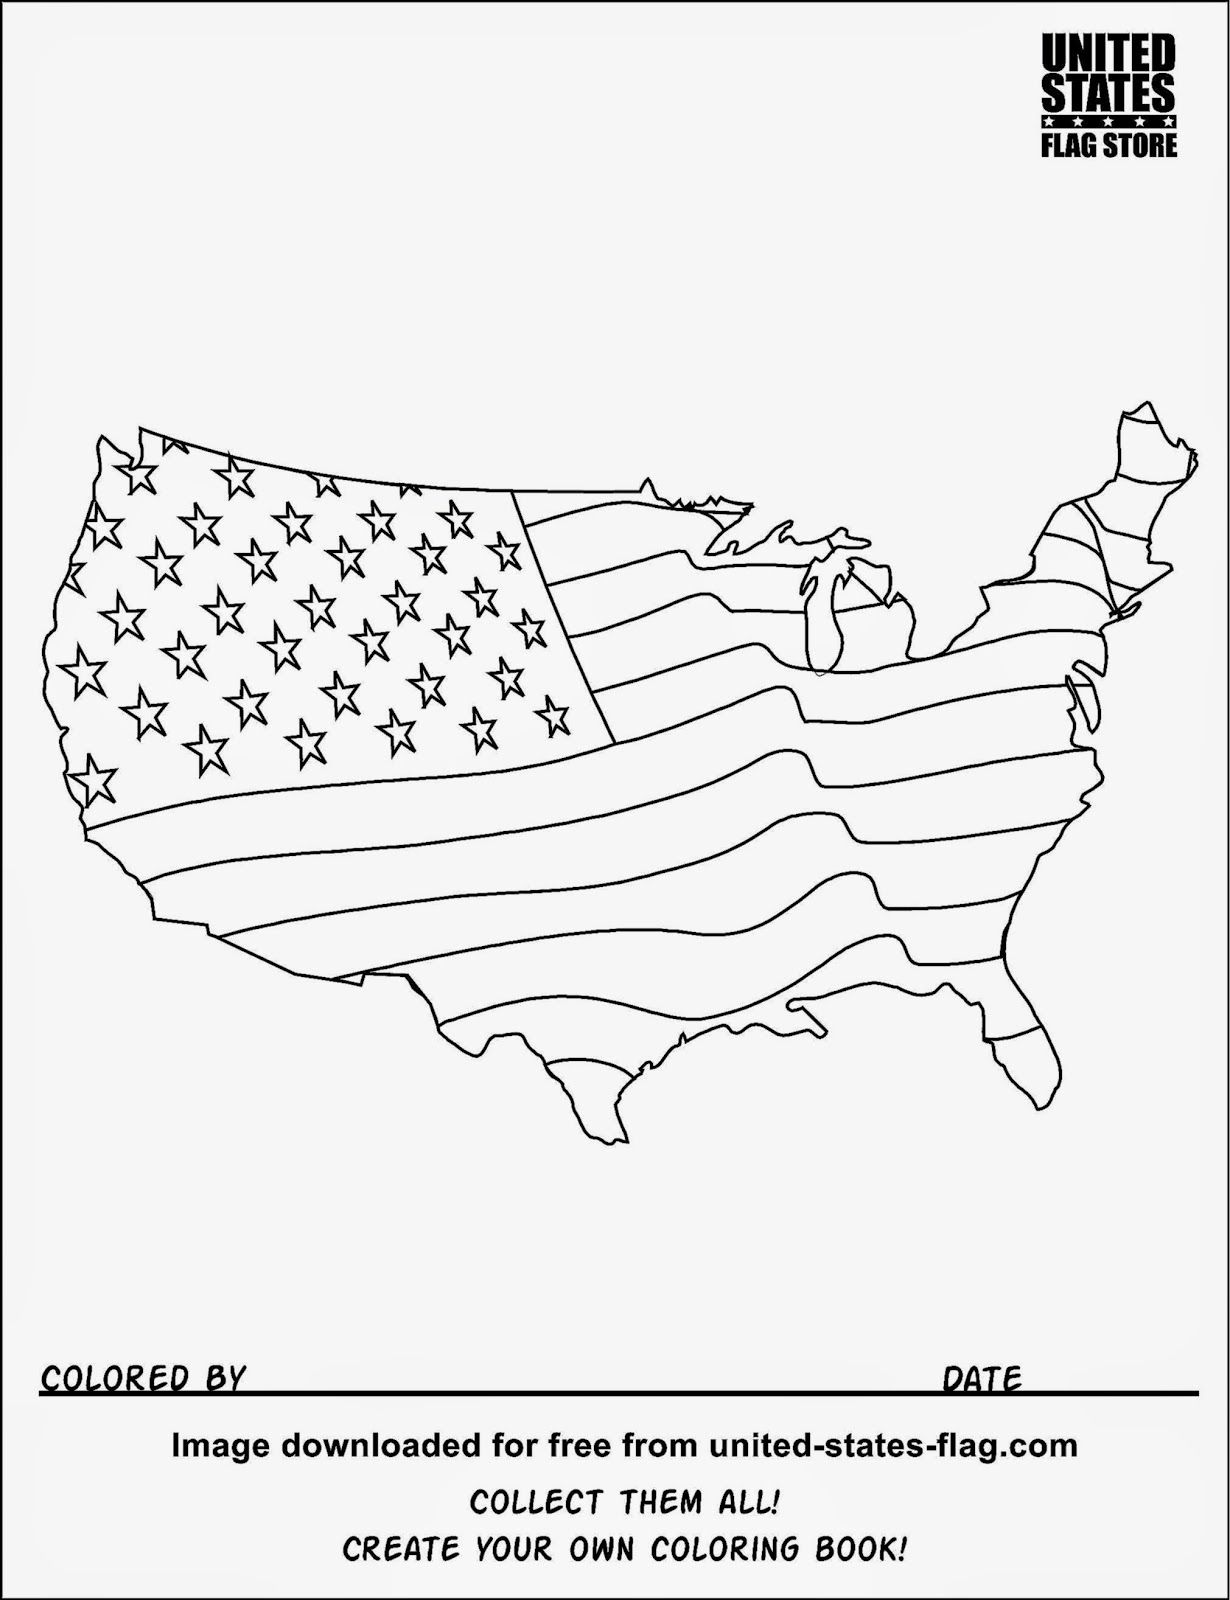 United States Coloring Book | Free Coloring Pages